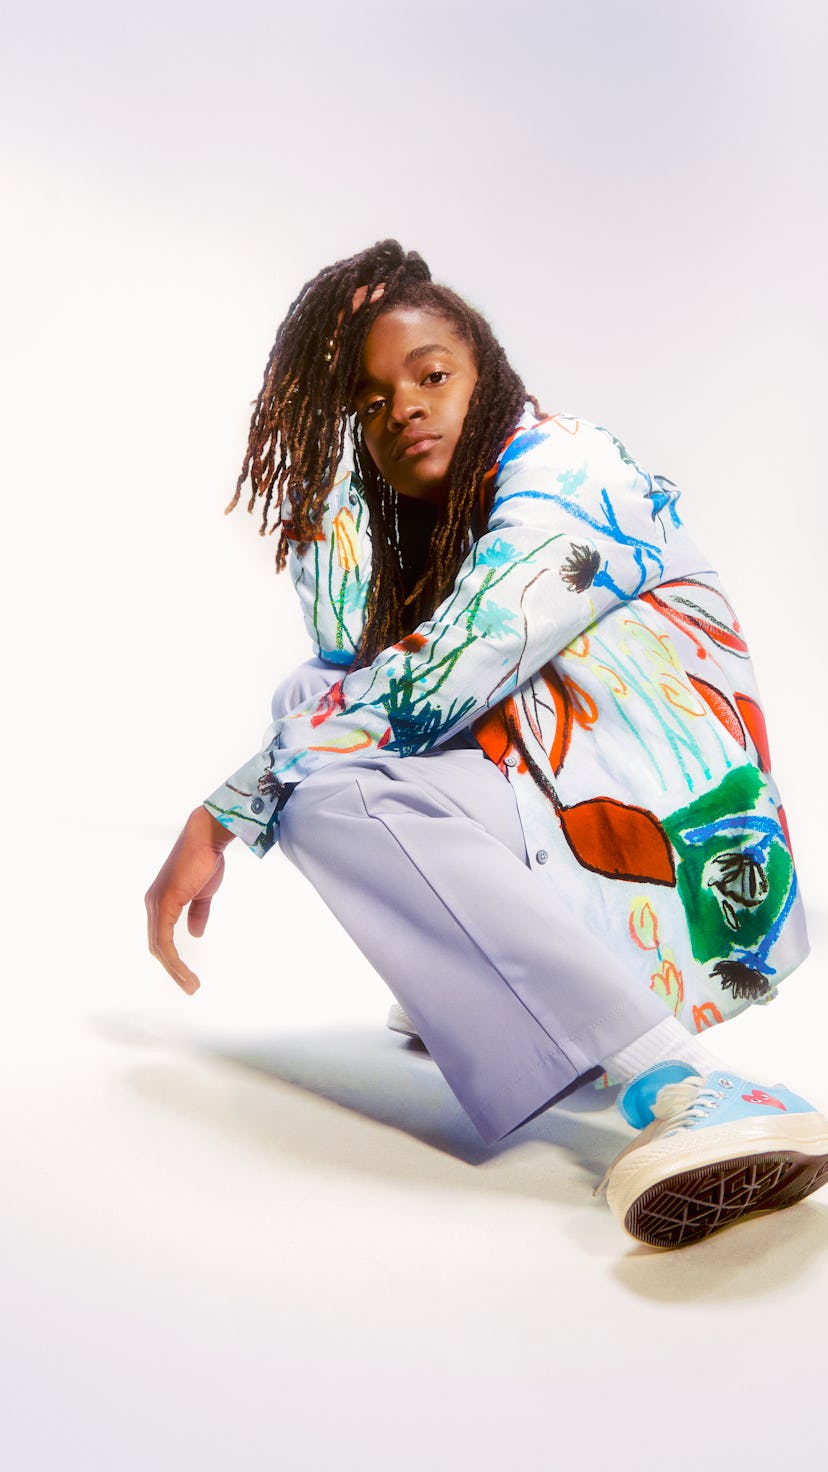 Reggae singer, songwriter, rapper, DJ and a guitarist Koffee posing in a colorful combination.